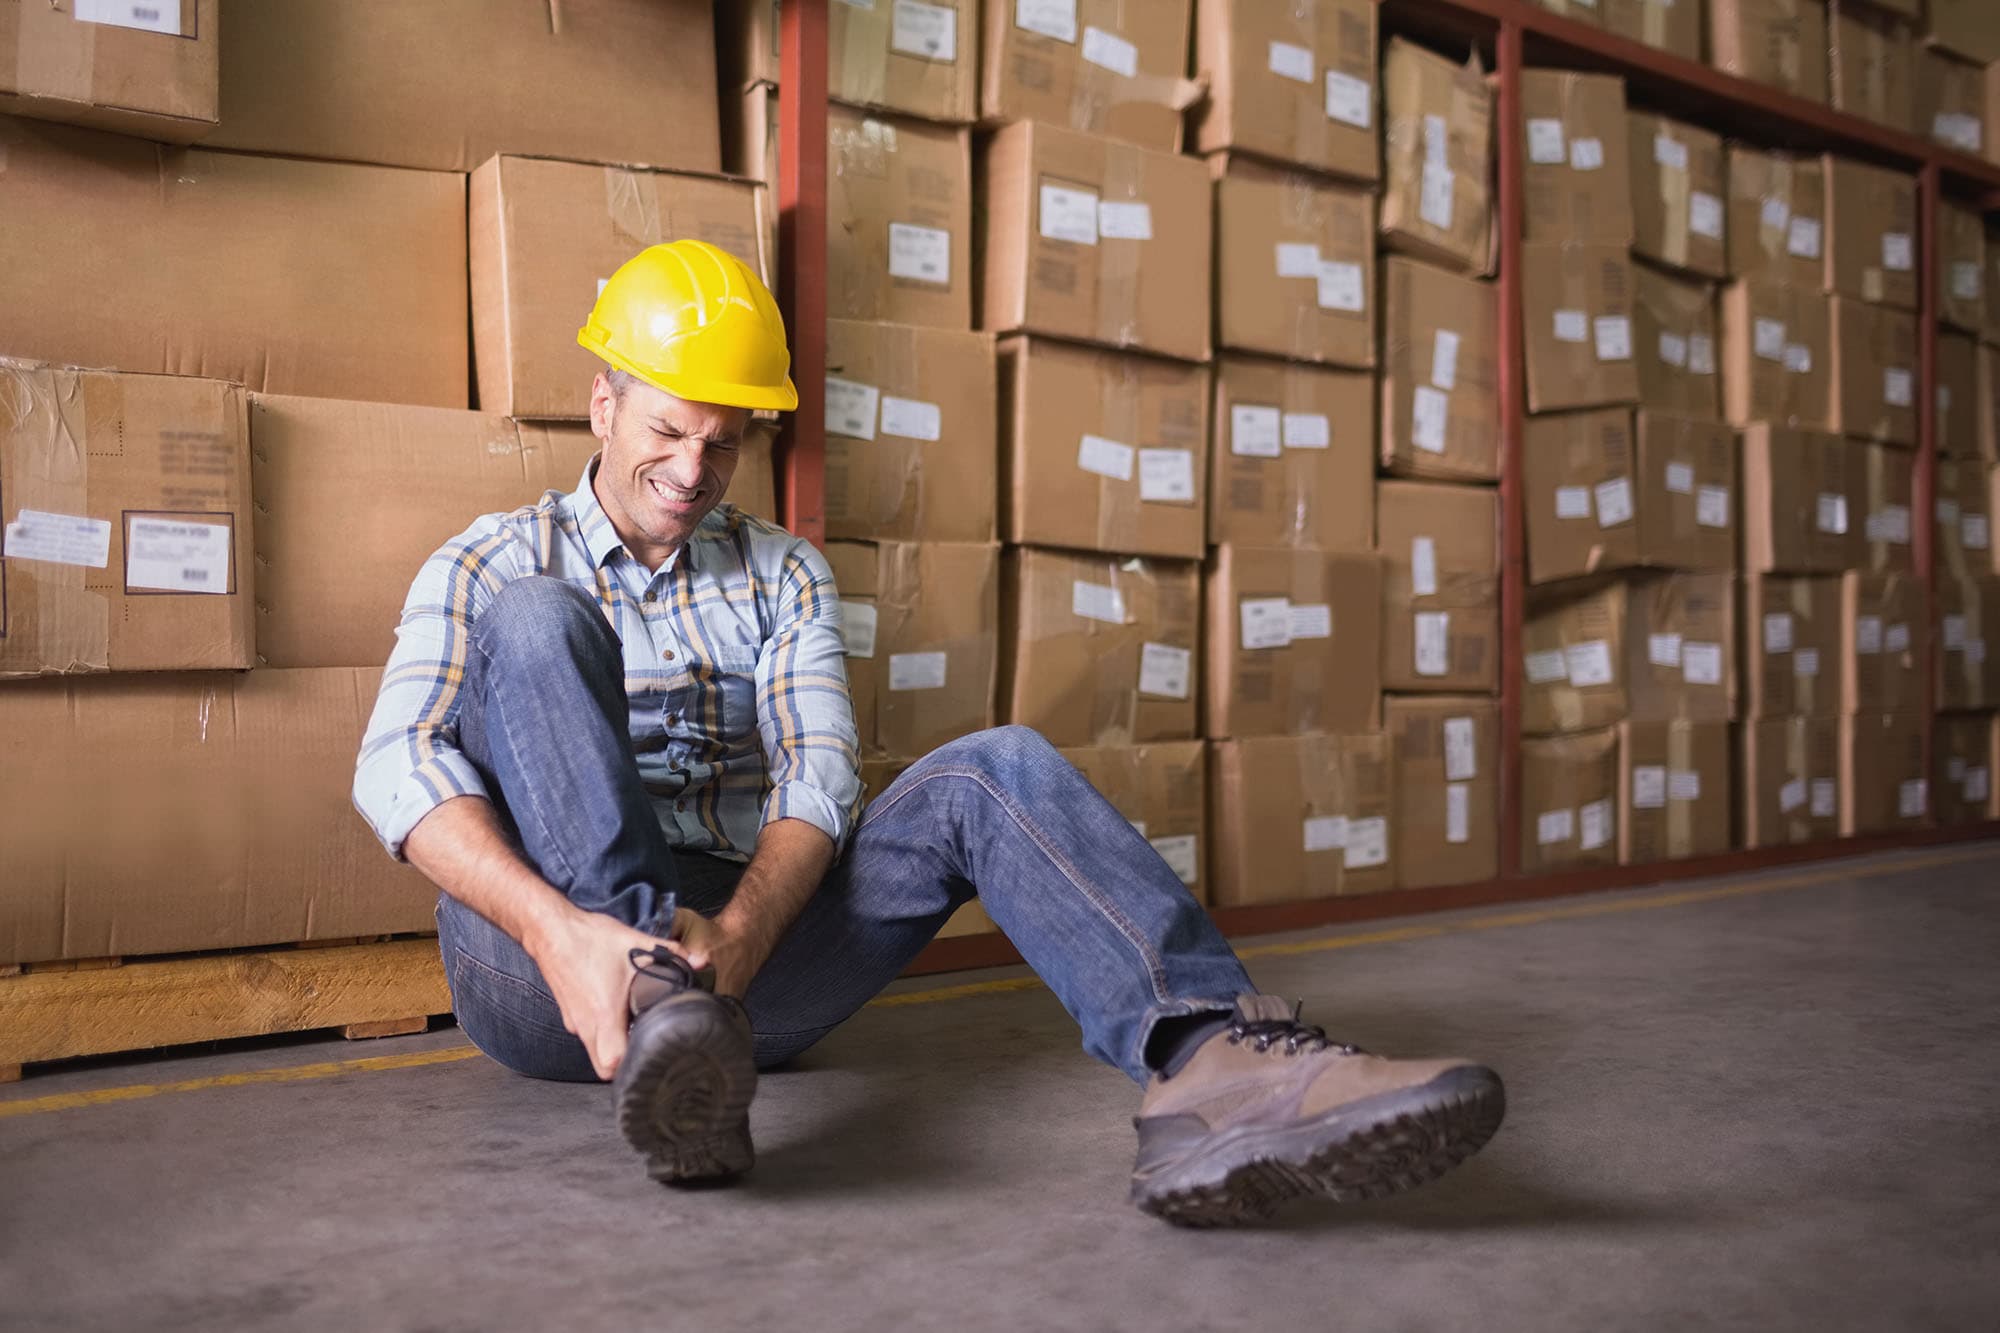 Warehouse worker sitting on ground clutching his ankle after being injured at work